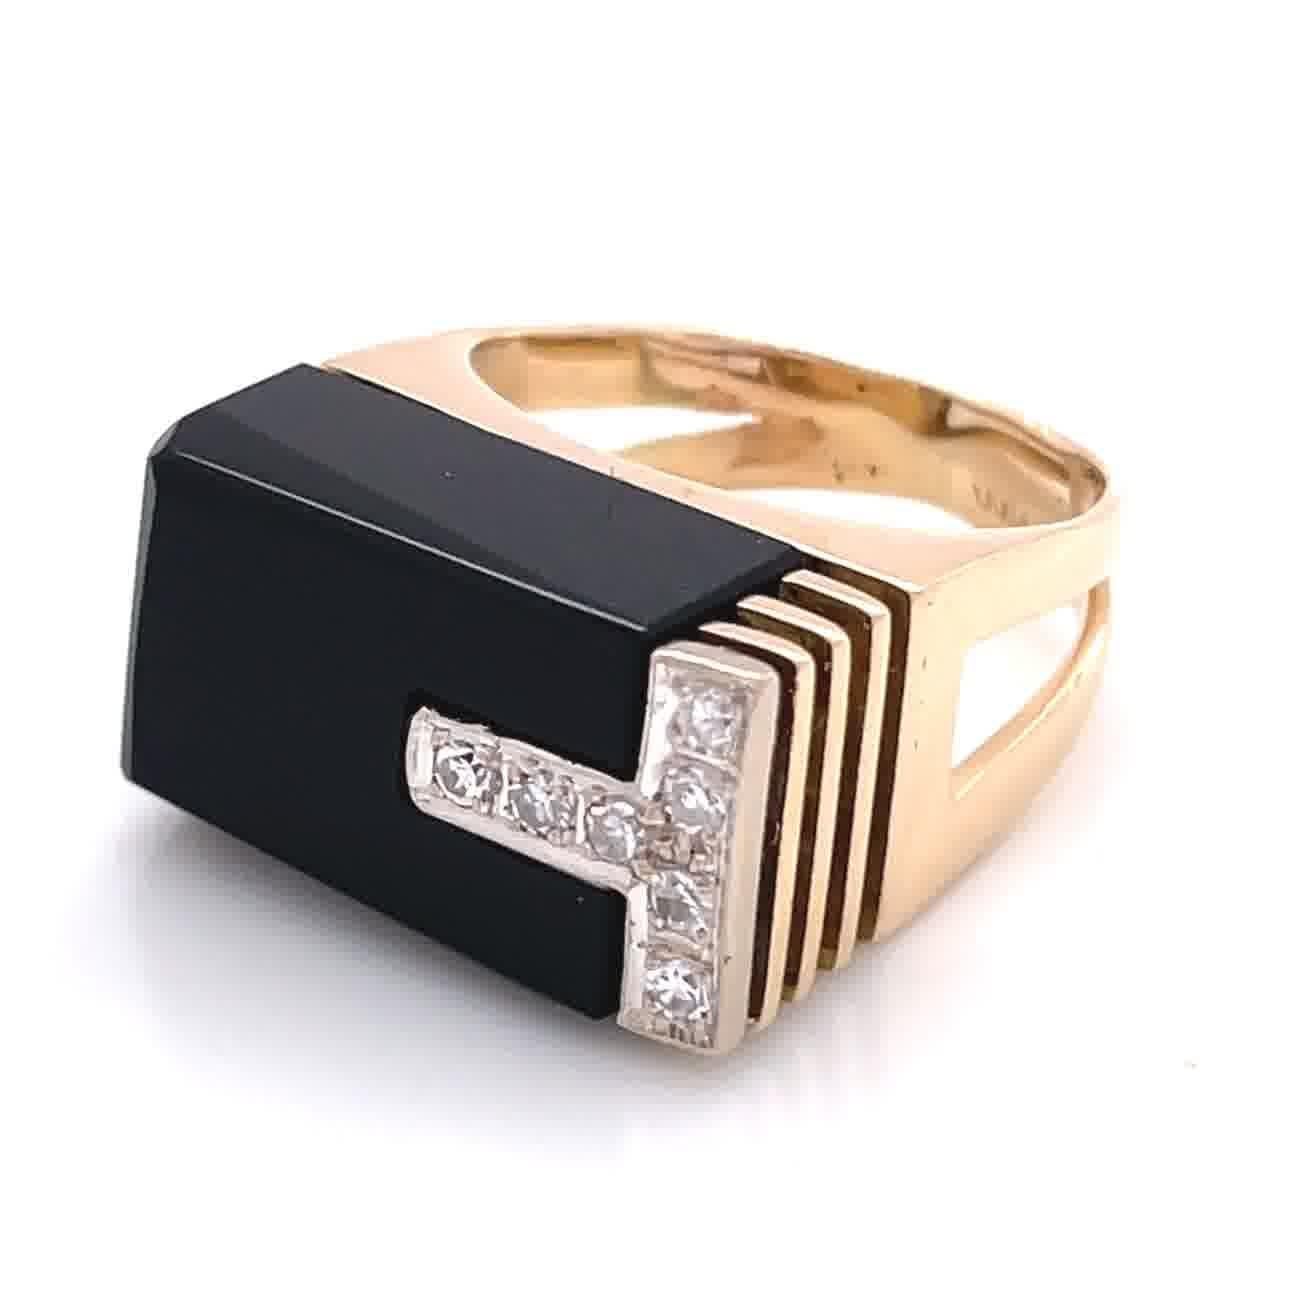 Modern, Cubism and Minimalism are synonymous with the 1960s era. Fewer, but bolder jewelry pieces were popular during that period. Now, this trend is starting to come back. Become the trend-setter with this Vintage Modernist Diamond Onyx 14k Gold